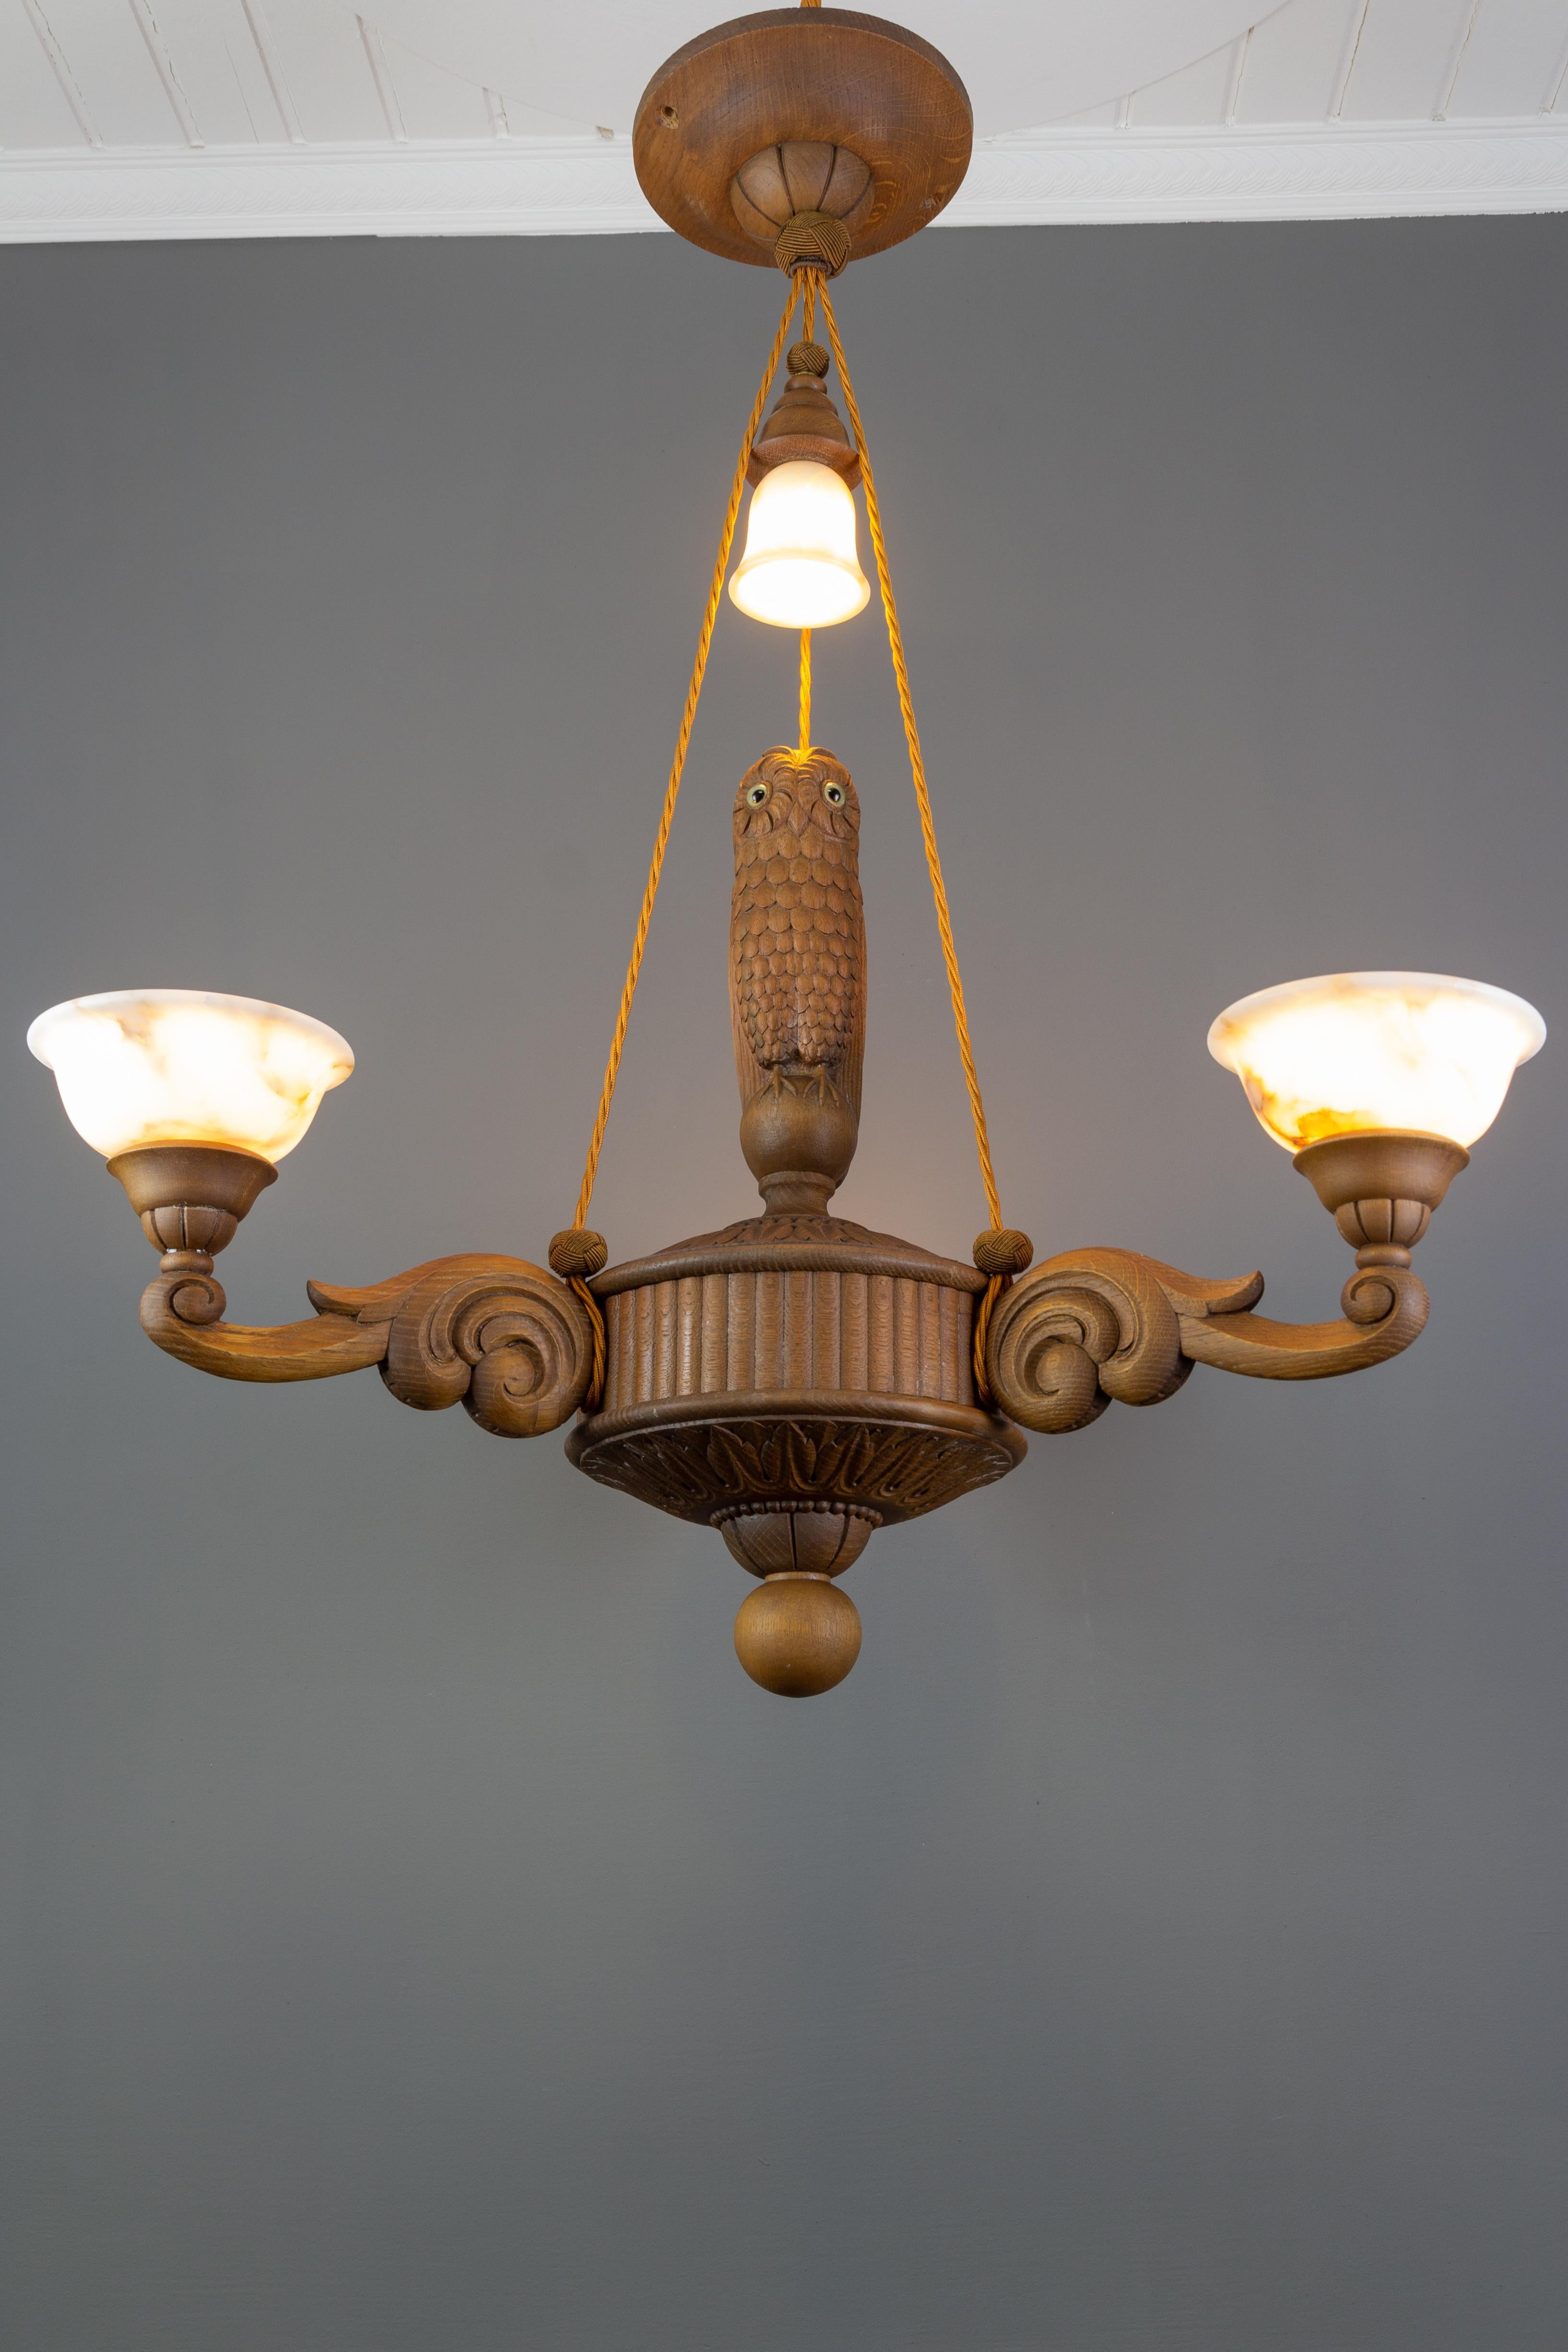 Beautiful and impressive four-light wooden chandelier with an owl figure, Germany, the 1930s. The hand carved chandelier features three arms, each with an alabaster lampshade and an adorable wooden figure of an owl in the center of the chandelier,